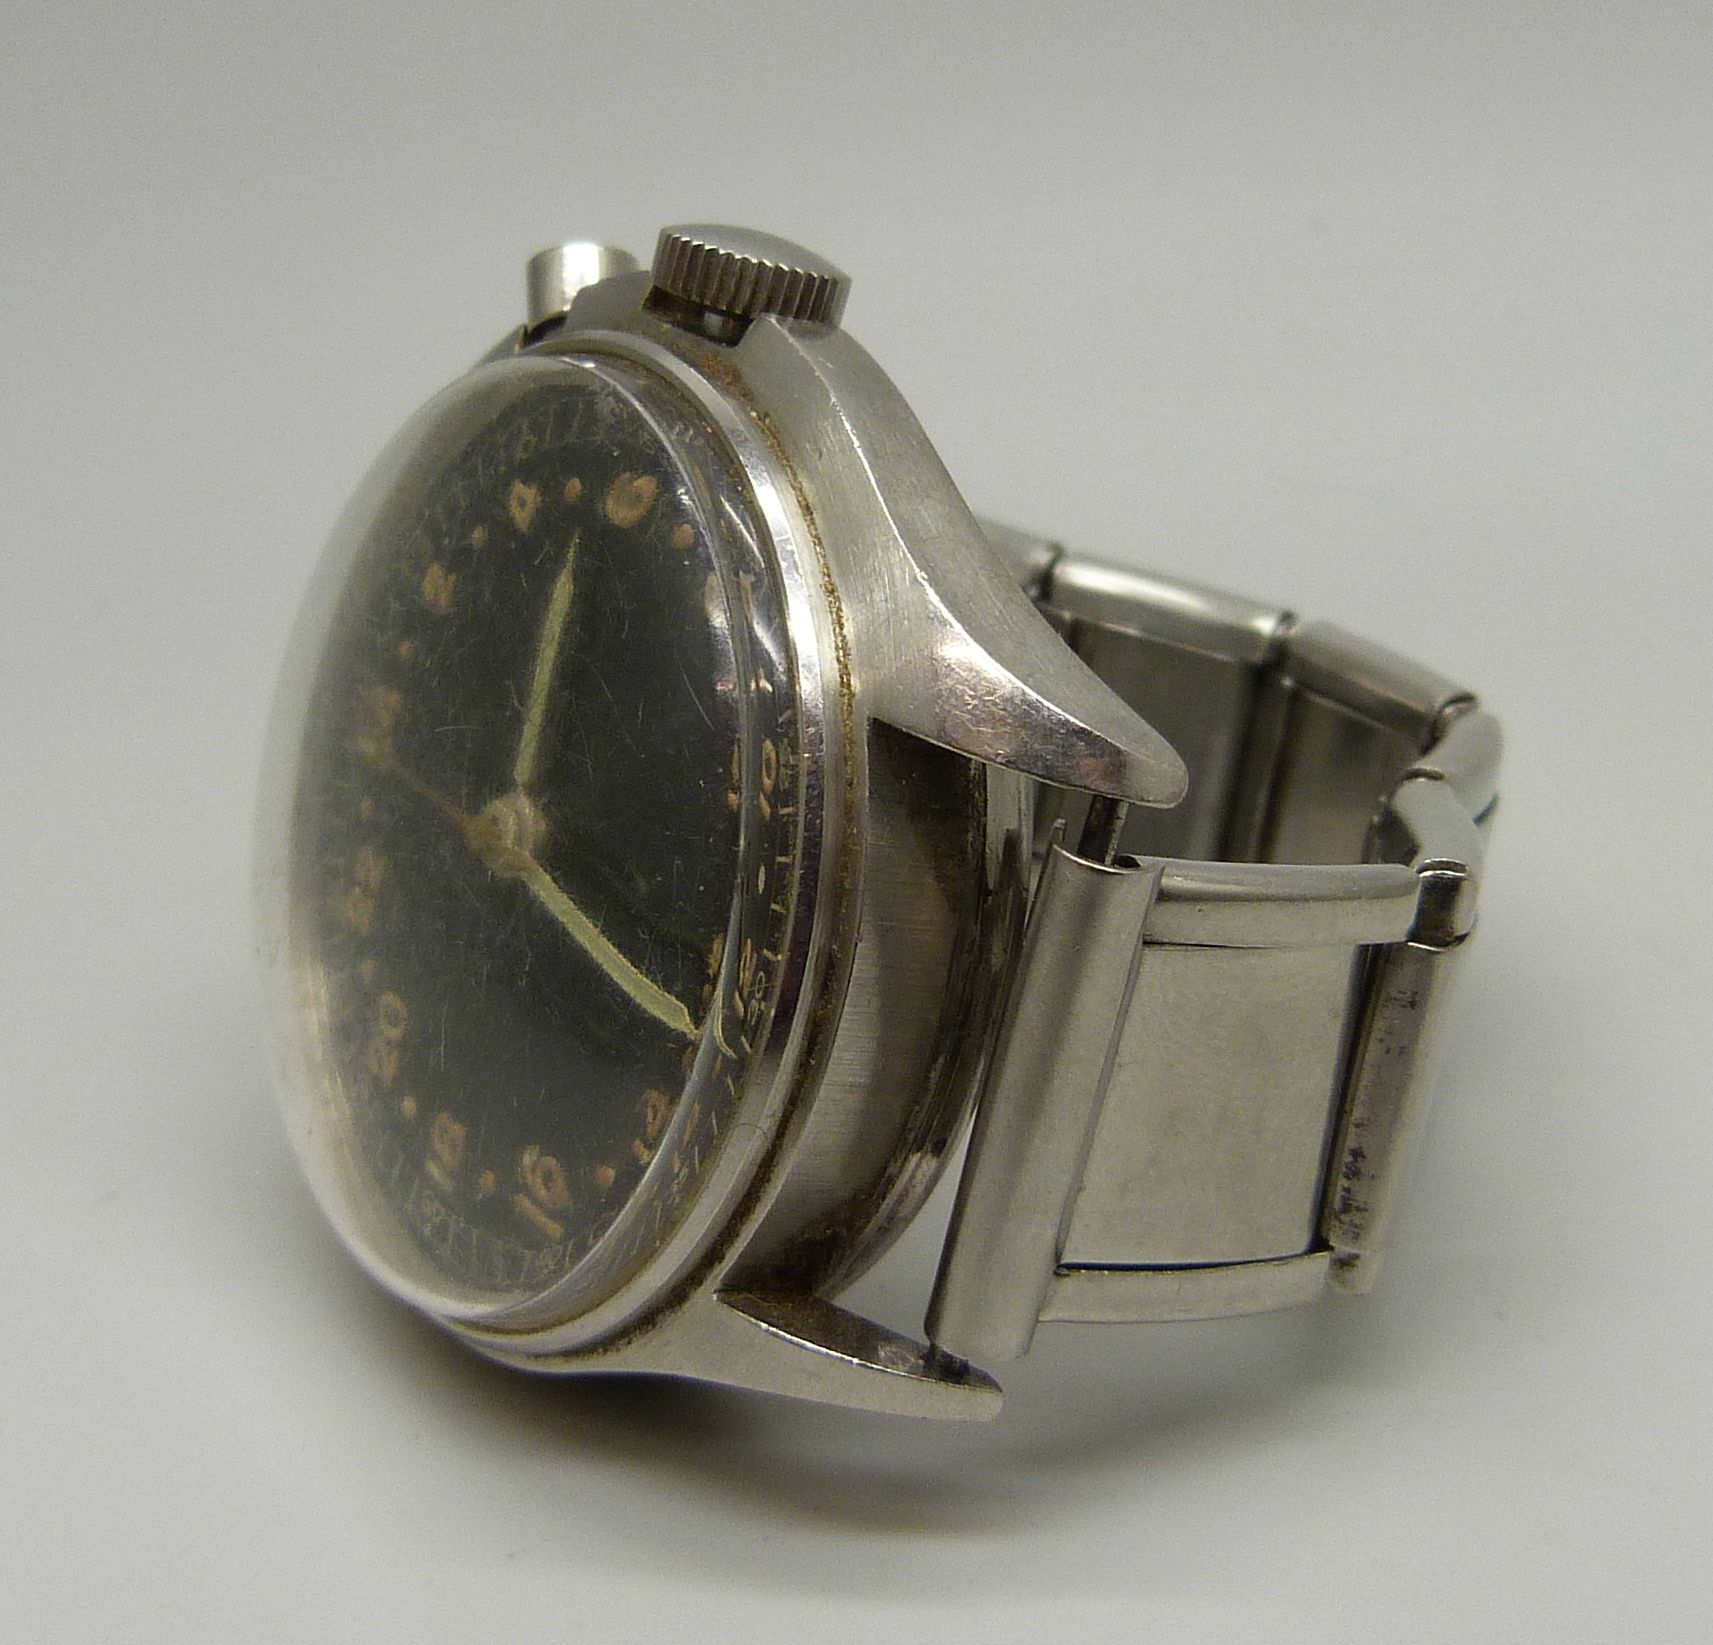 A German Lemania single button chronometer with 24-hour clock and sweep second hand, 39mm case - Image 3 of 5